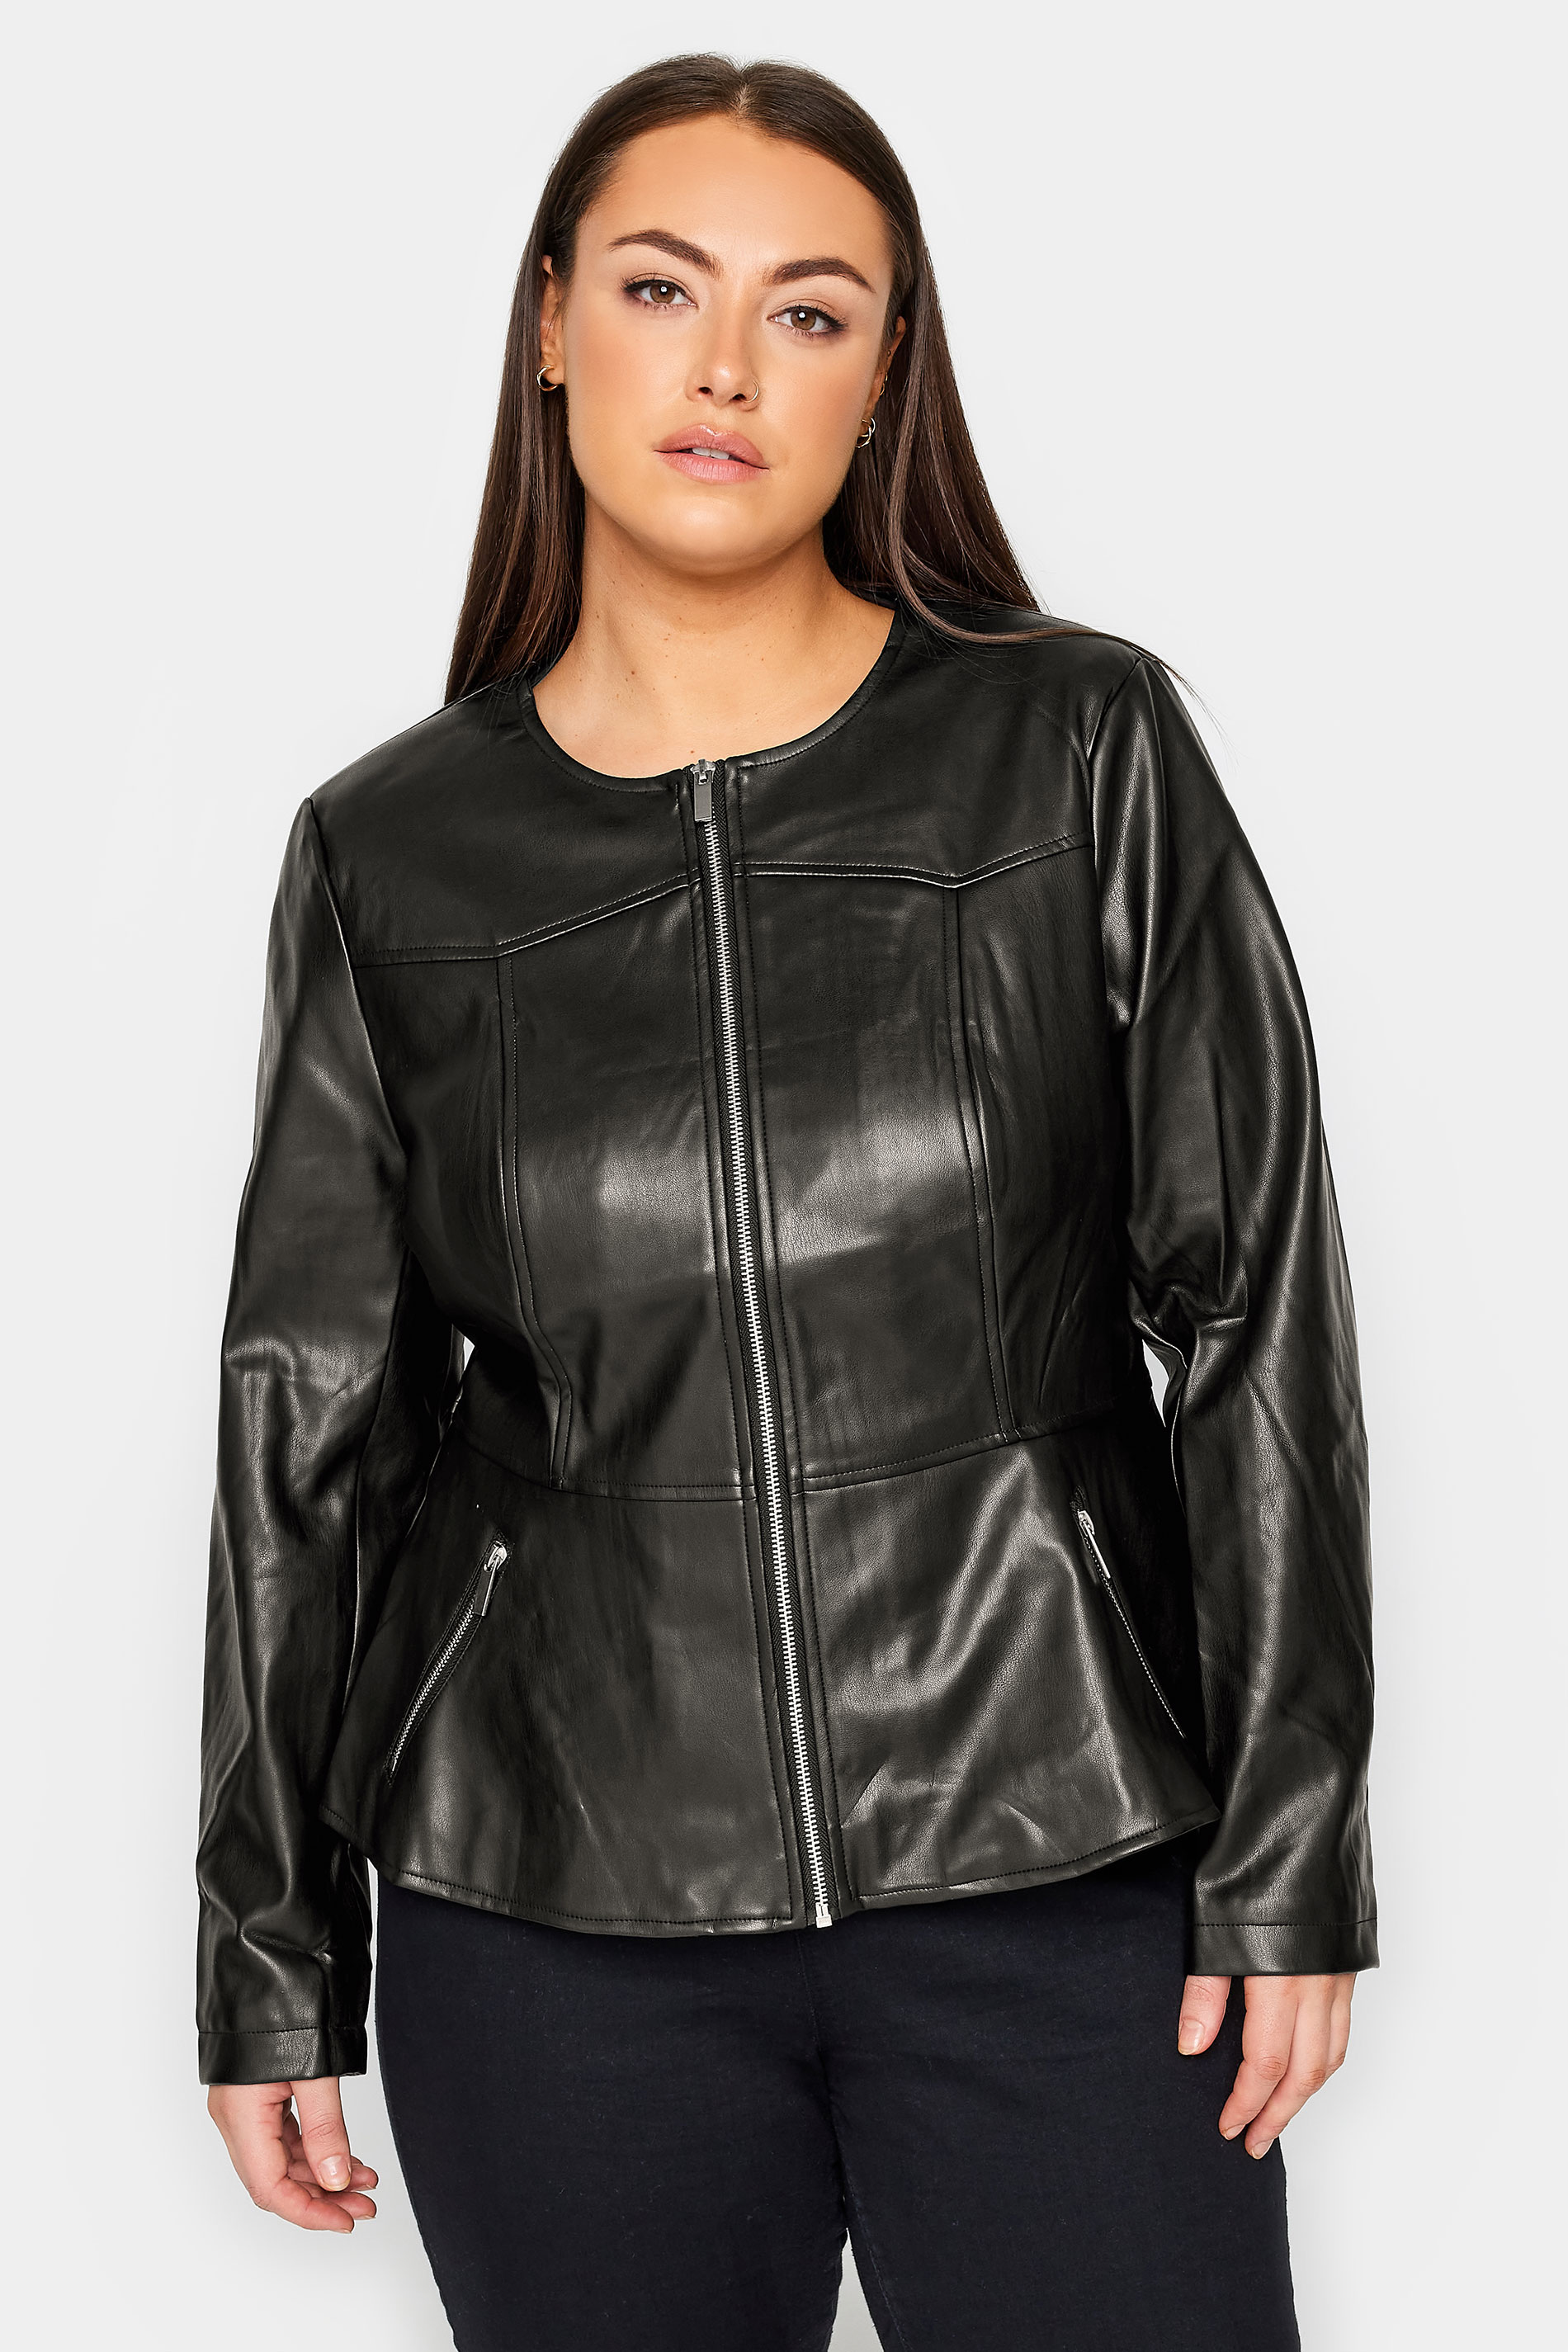 City Chic Black Faux Leather Fitted Jacket | Evans 2